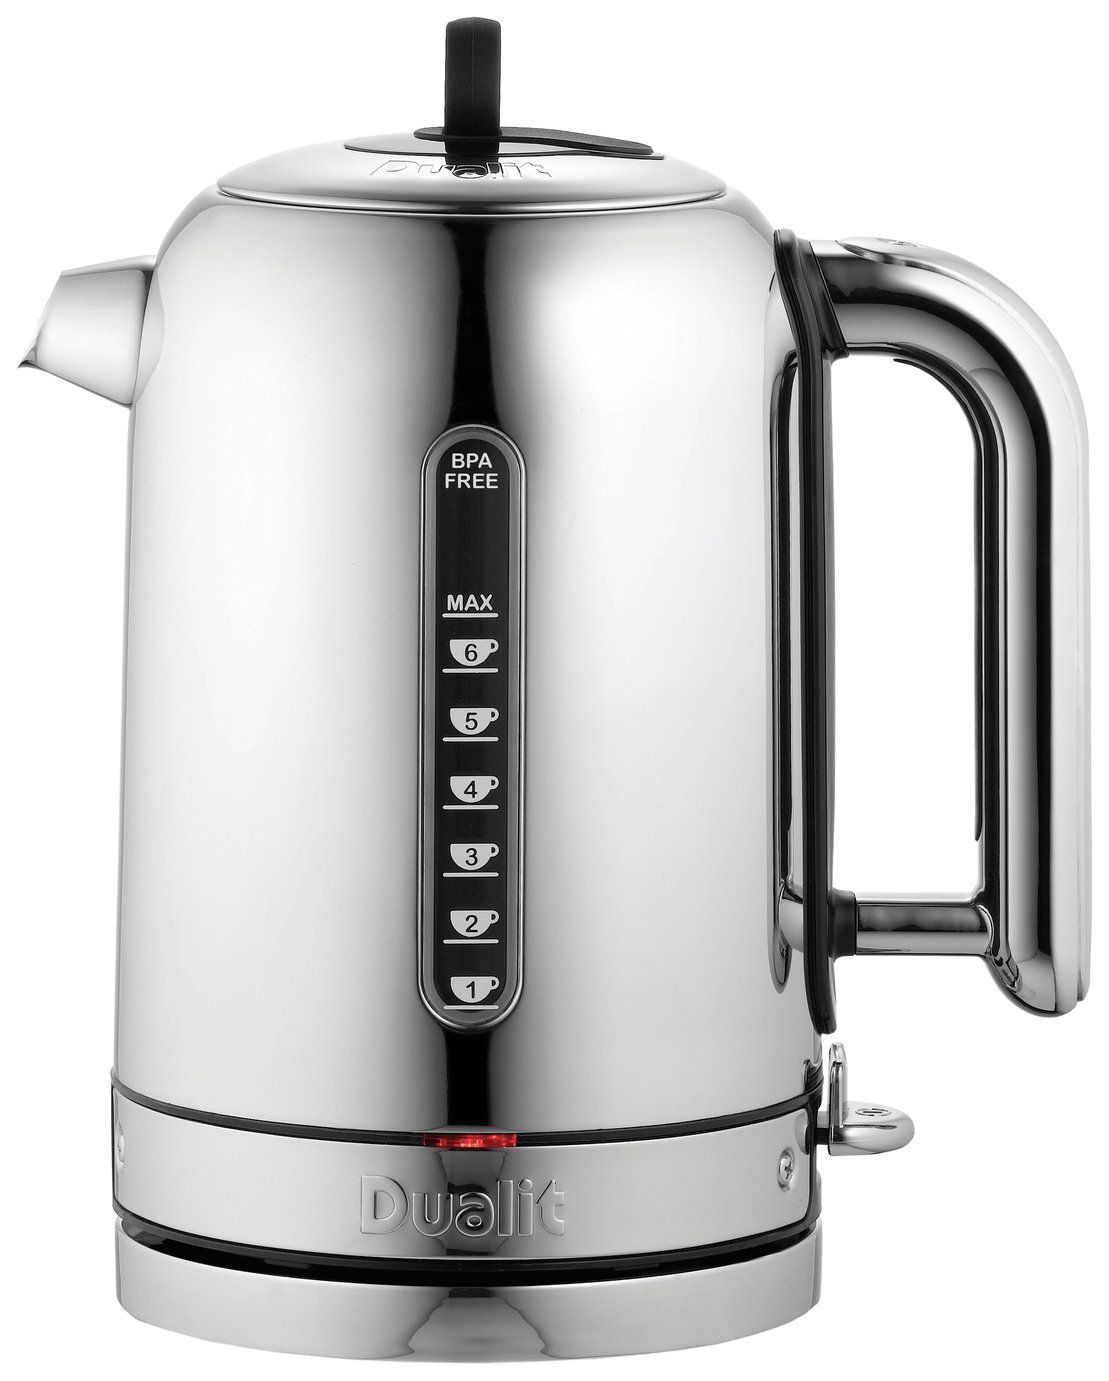 Dualit 72796 Classic Jug Kettle - Stainless Steel